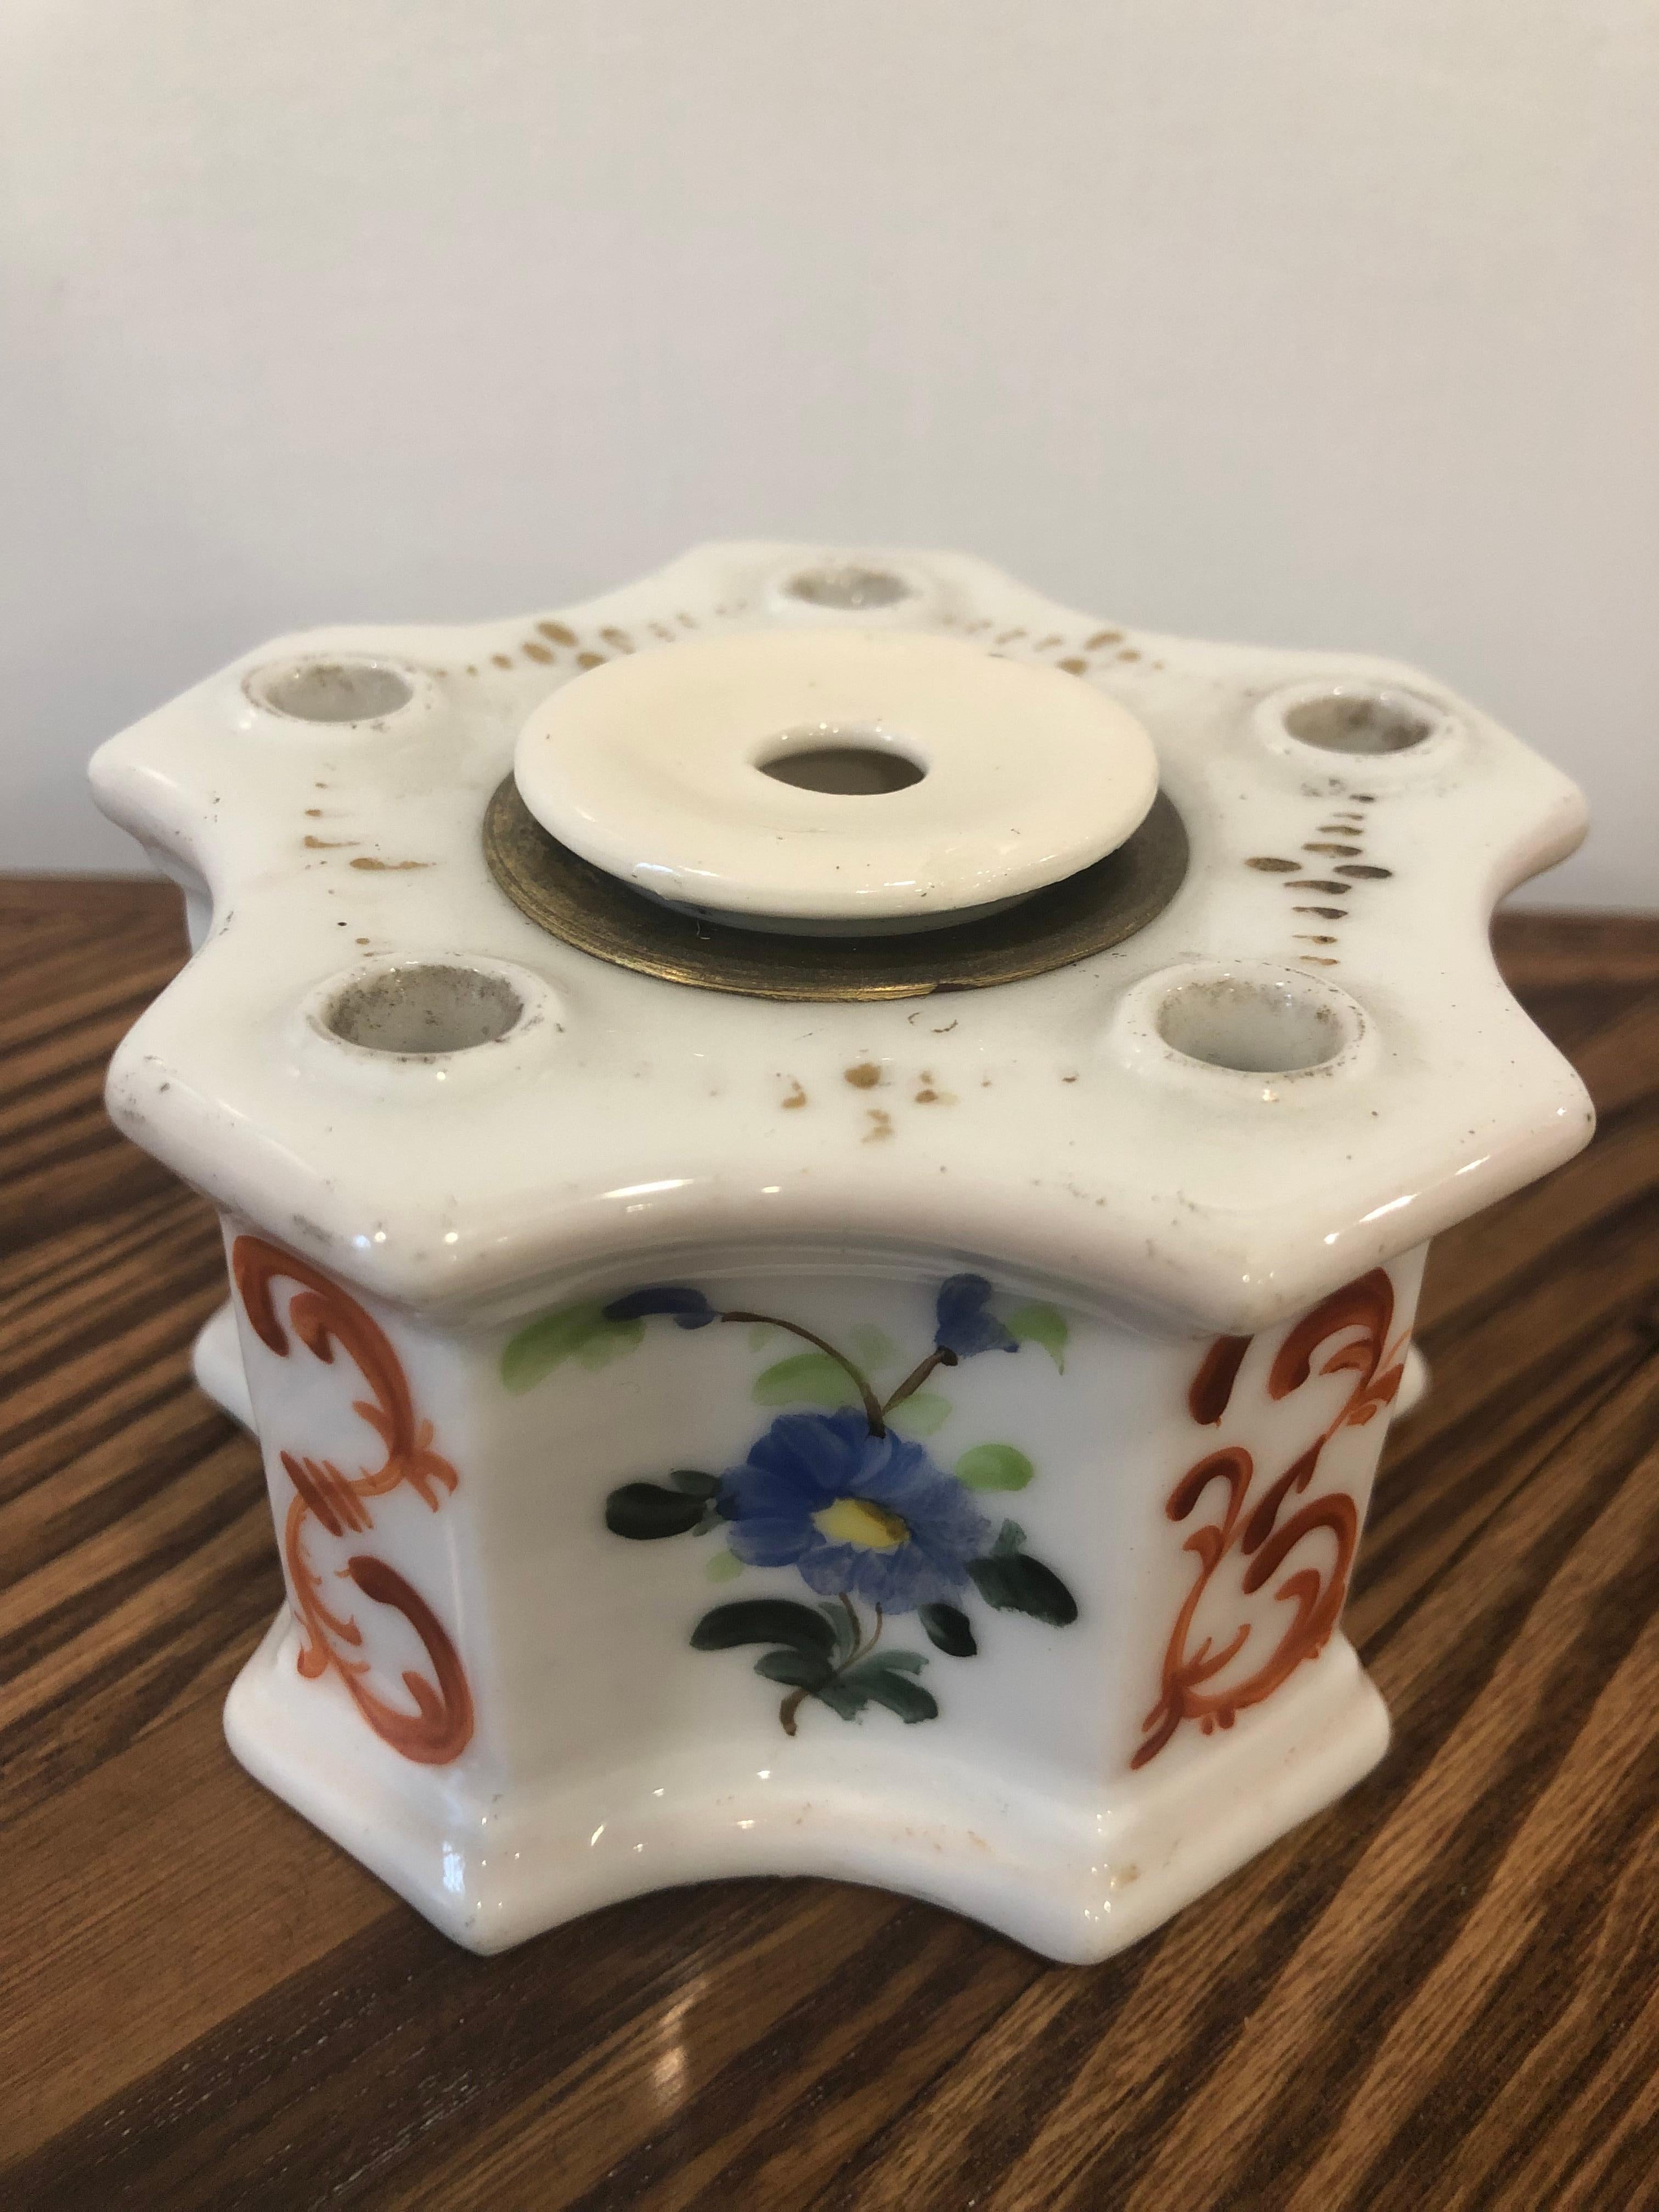 Continental 1830 Porcelain hand painted five sided brass lip inkwell, inkpot. This is a very nice piece from a private collector who traveled the world buying and selling wonderful pieces.